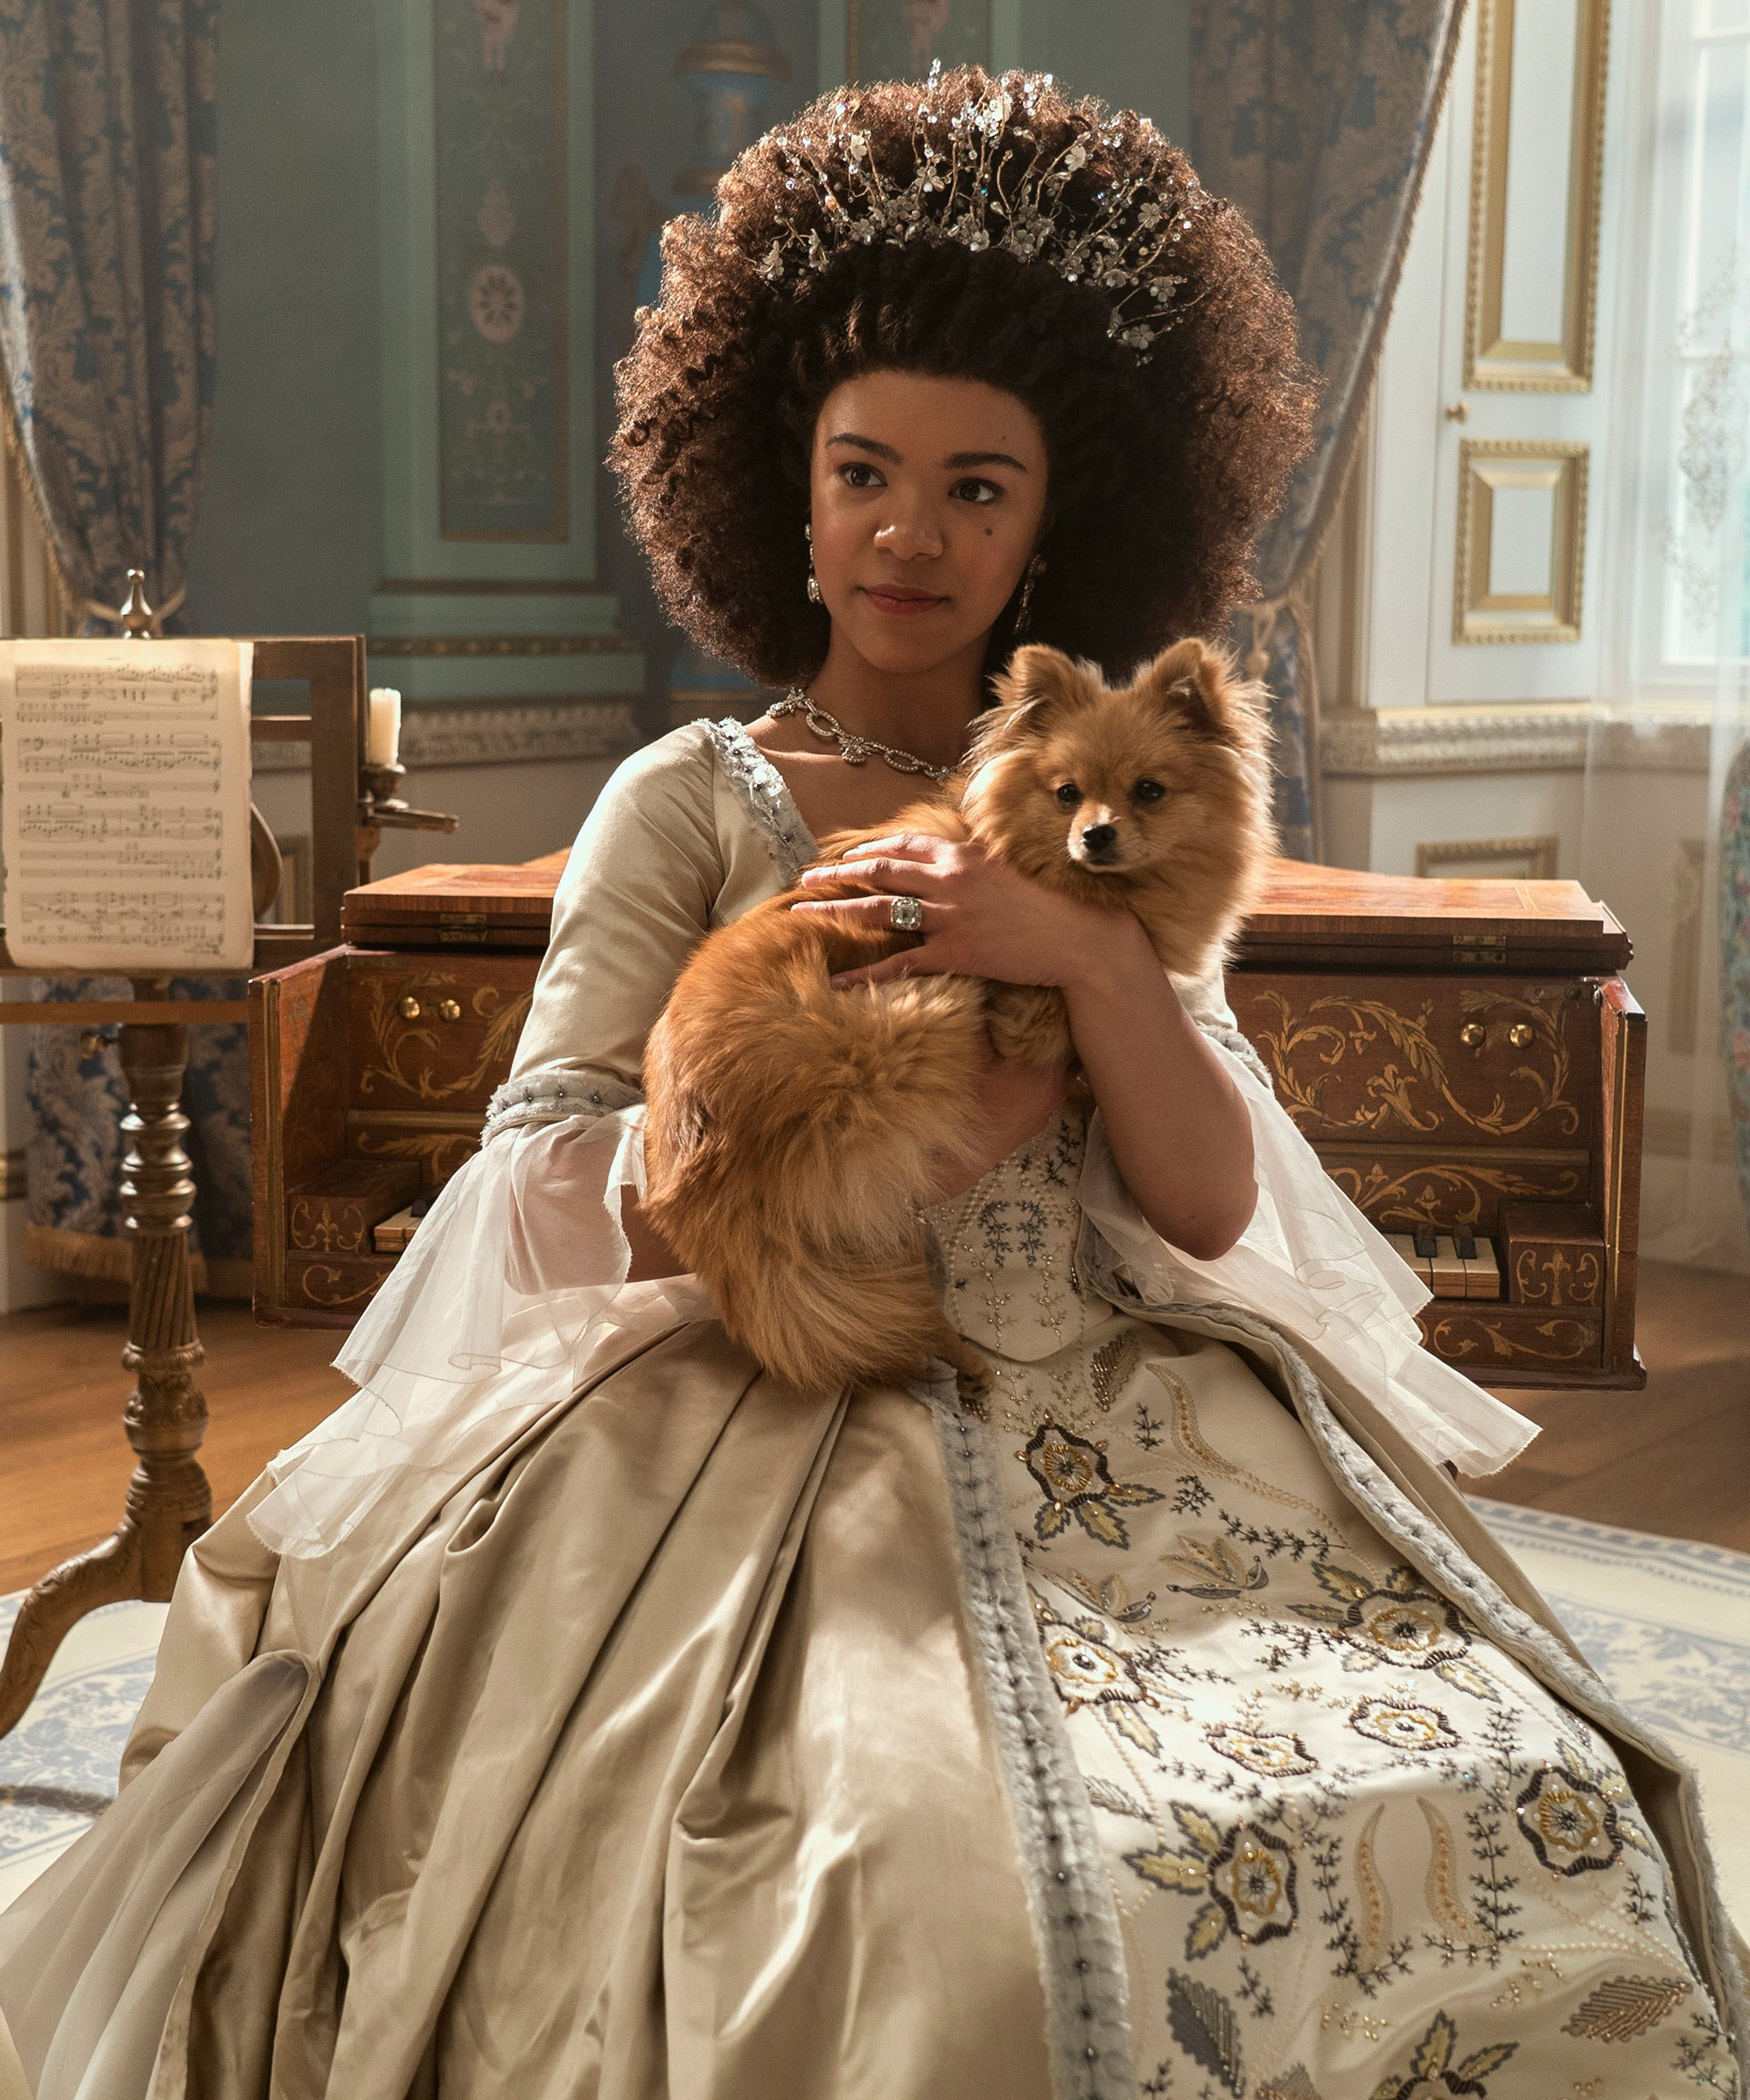 On Queen Charlotte A Bridgerton Story, Race and Romance